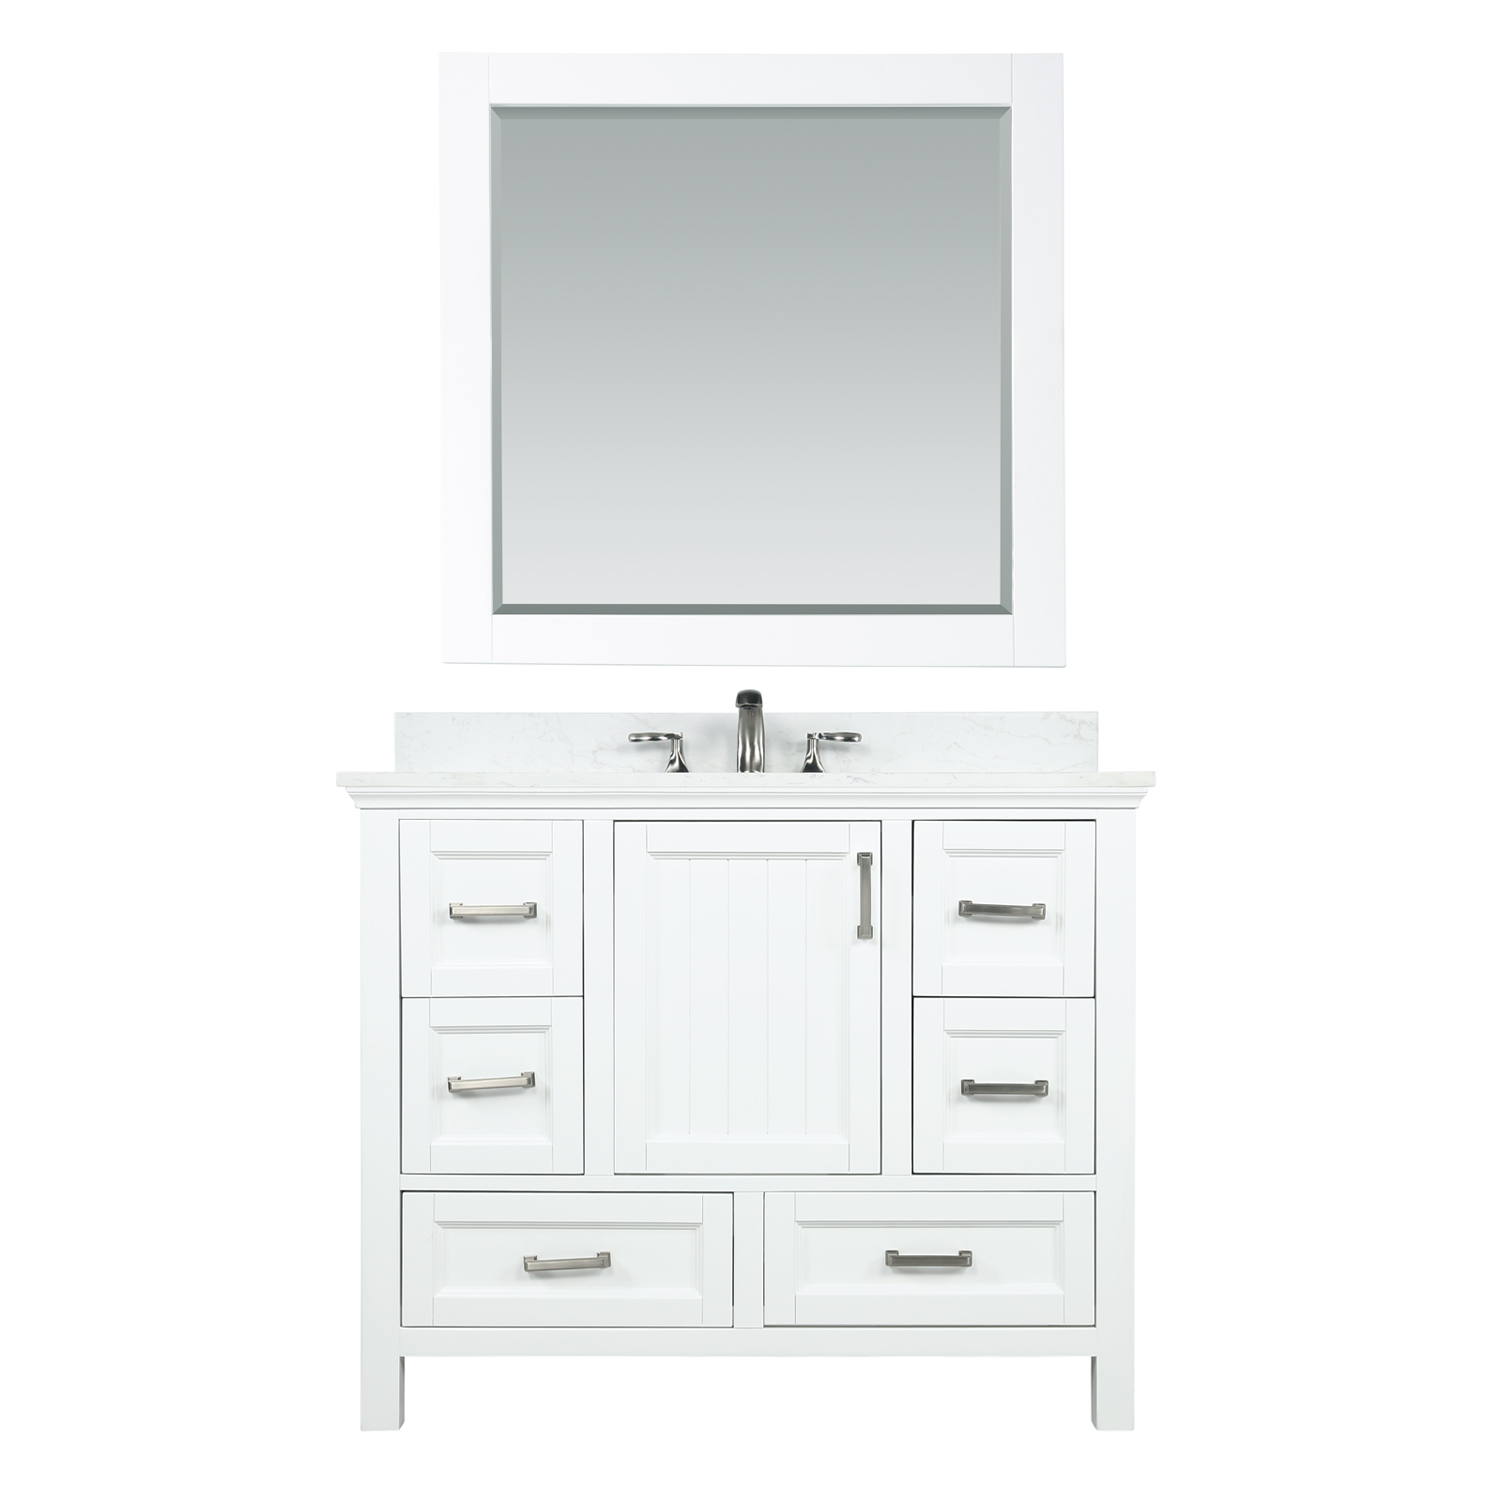 Issac Edwards Collection  42" Single Bathroom Vanity Set in White and Carrara White Marble Countertop without Mirror 